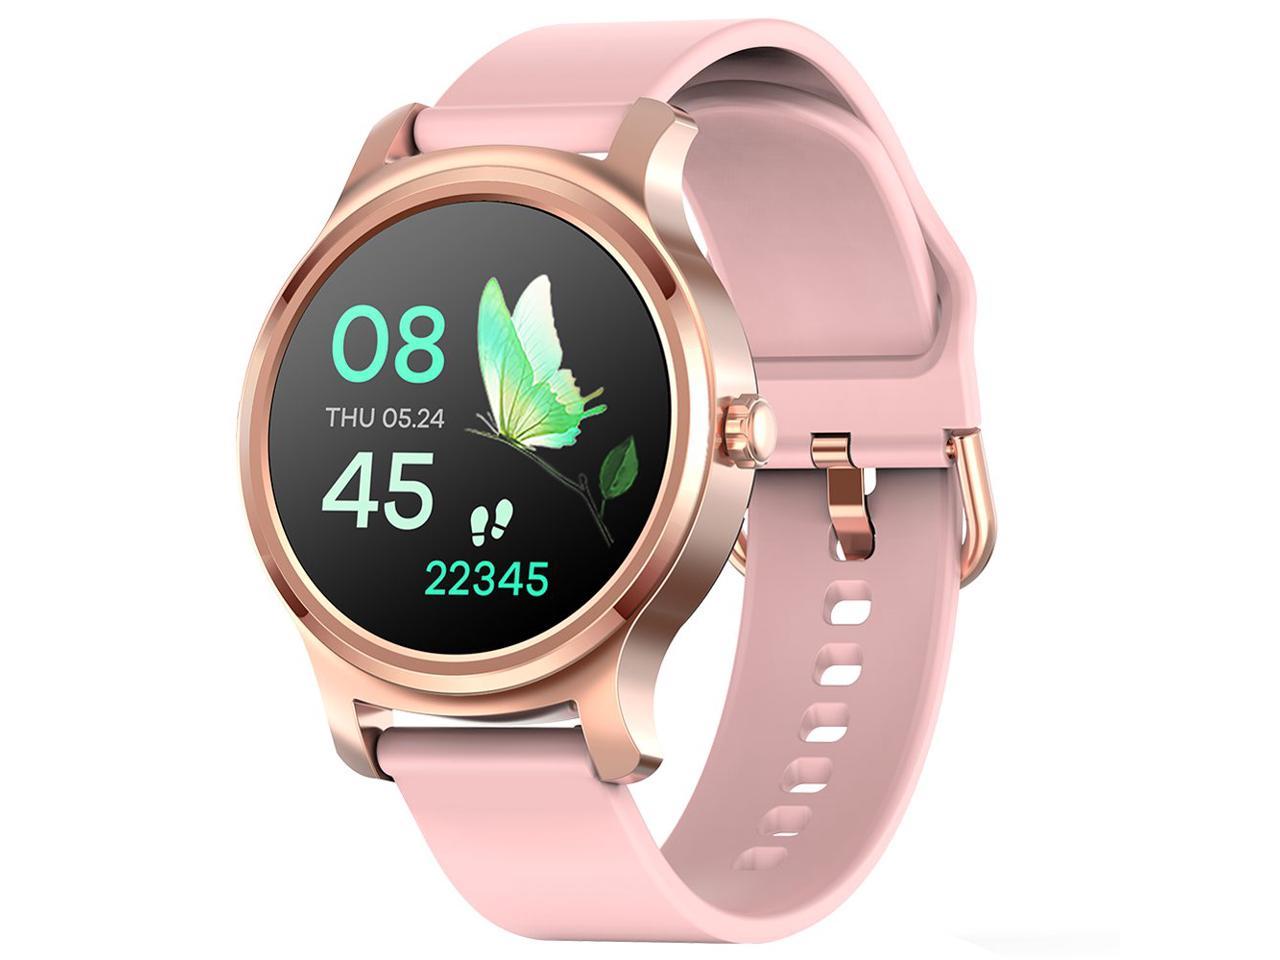 Model-R2 Smart Watch GPS Bluetooth Heart Rate Monitor Call Message Reminder Music Player - Pink